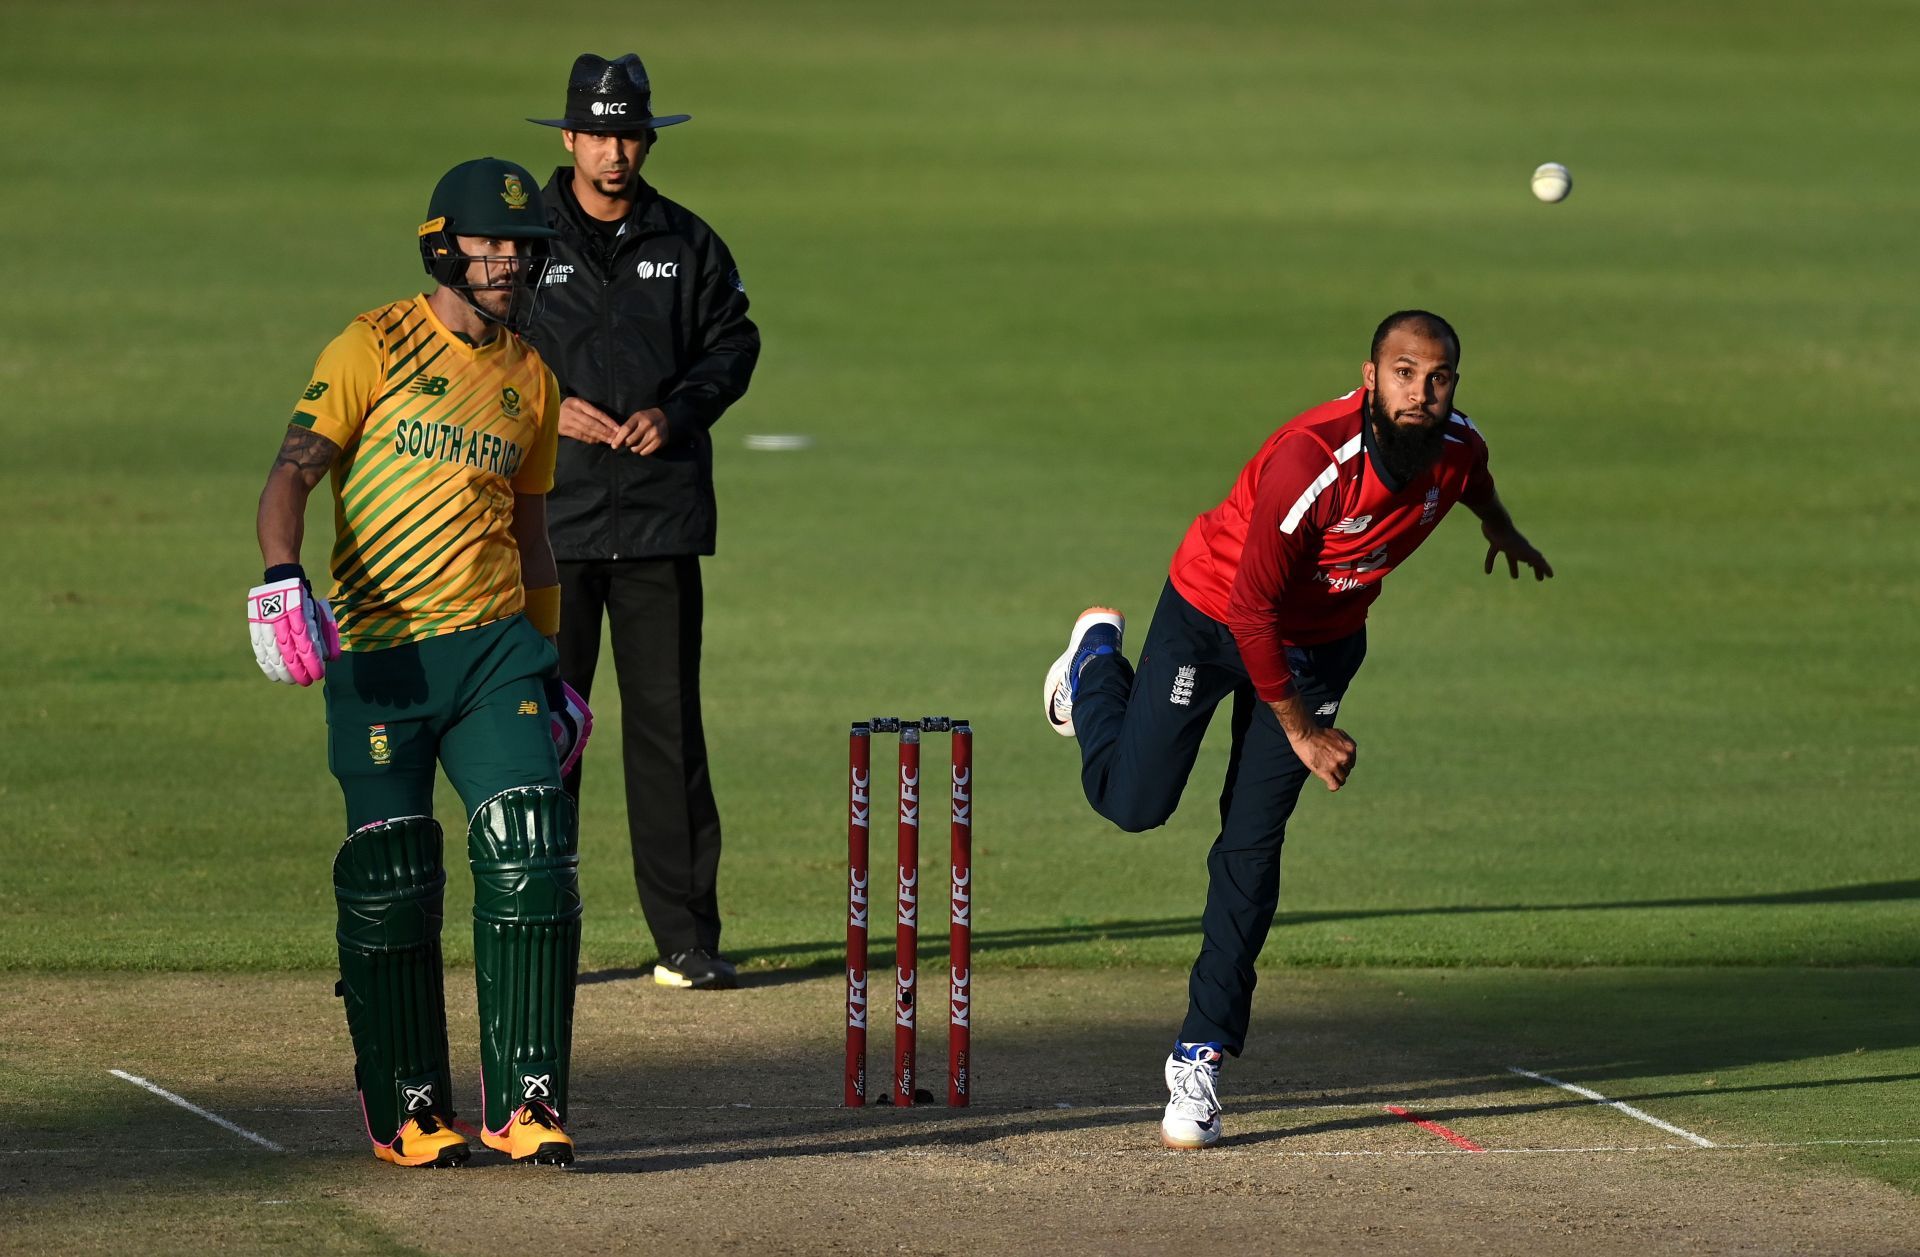 Adil Rashid bowling against South Africa. Pic: Getty Images